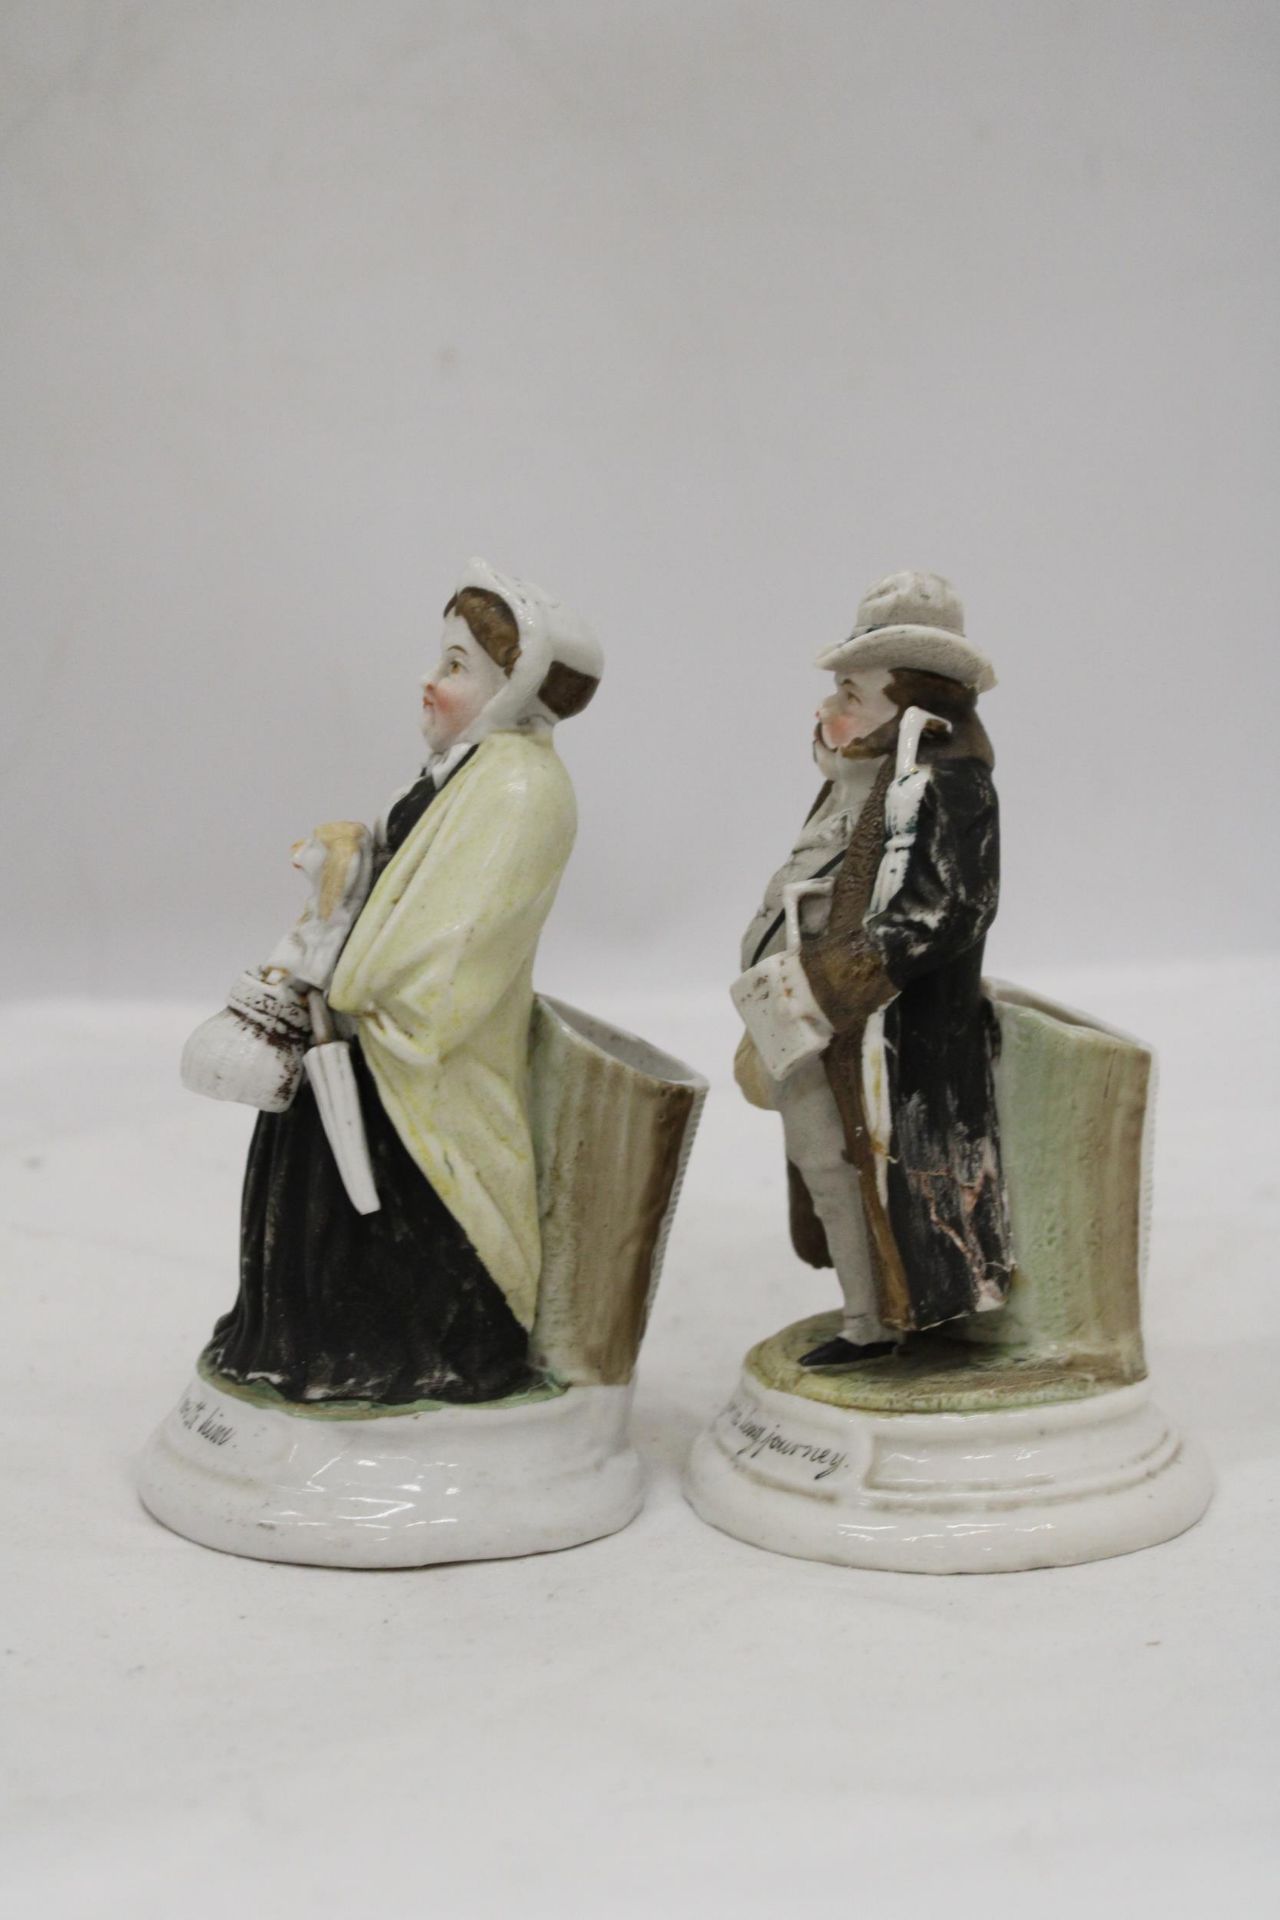 TWO ORIGINAL CONTA AND BOHME GERMAN FAIRINGS MATCHSTICK HOLDERS, 'I AM STARTING FOR A LONG JOURNEY', - Bild 5 aus 6